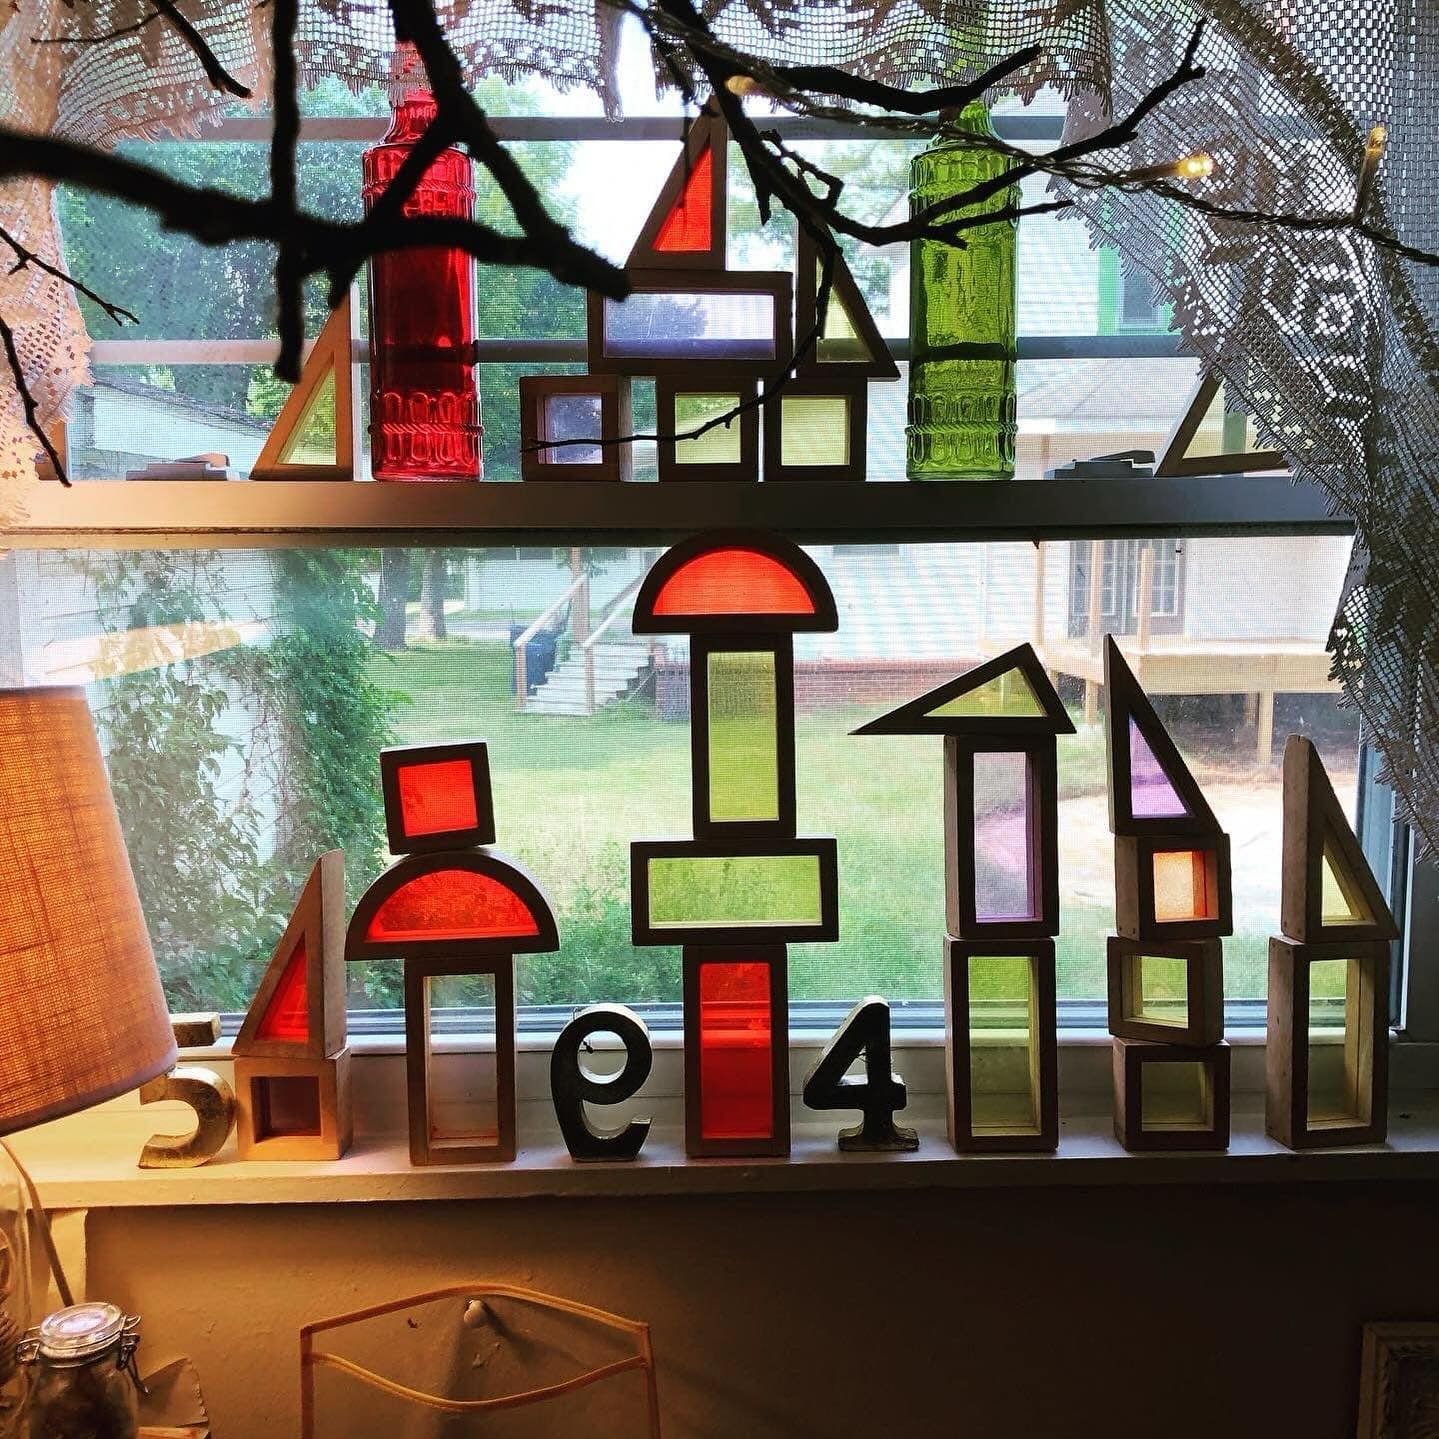 &ldquo;Designing beautiful spaces in early childhood.&rdquo; That&rsquo;s what Early Childhood Solutions is digging into this month. We believe in the power of environment to inspire young minds. Take a look at this stunning window in one of our clas